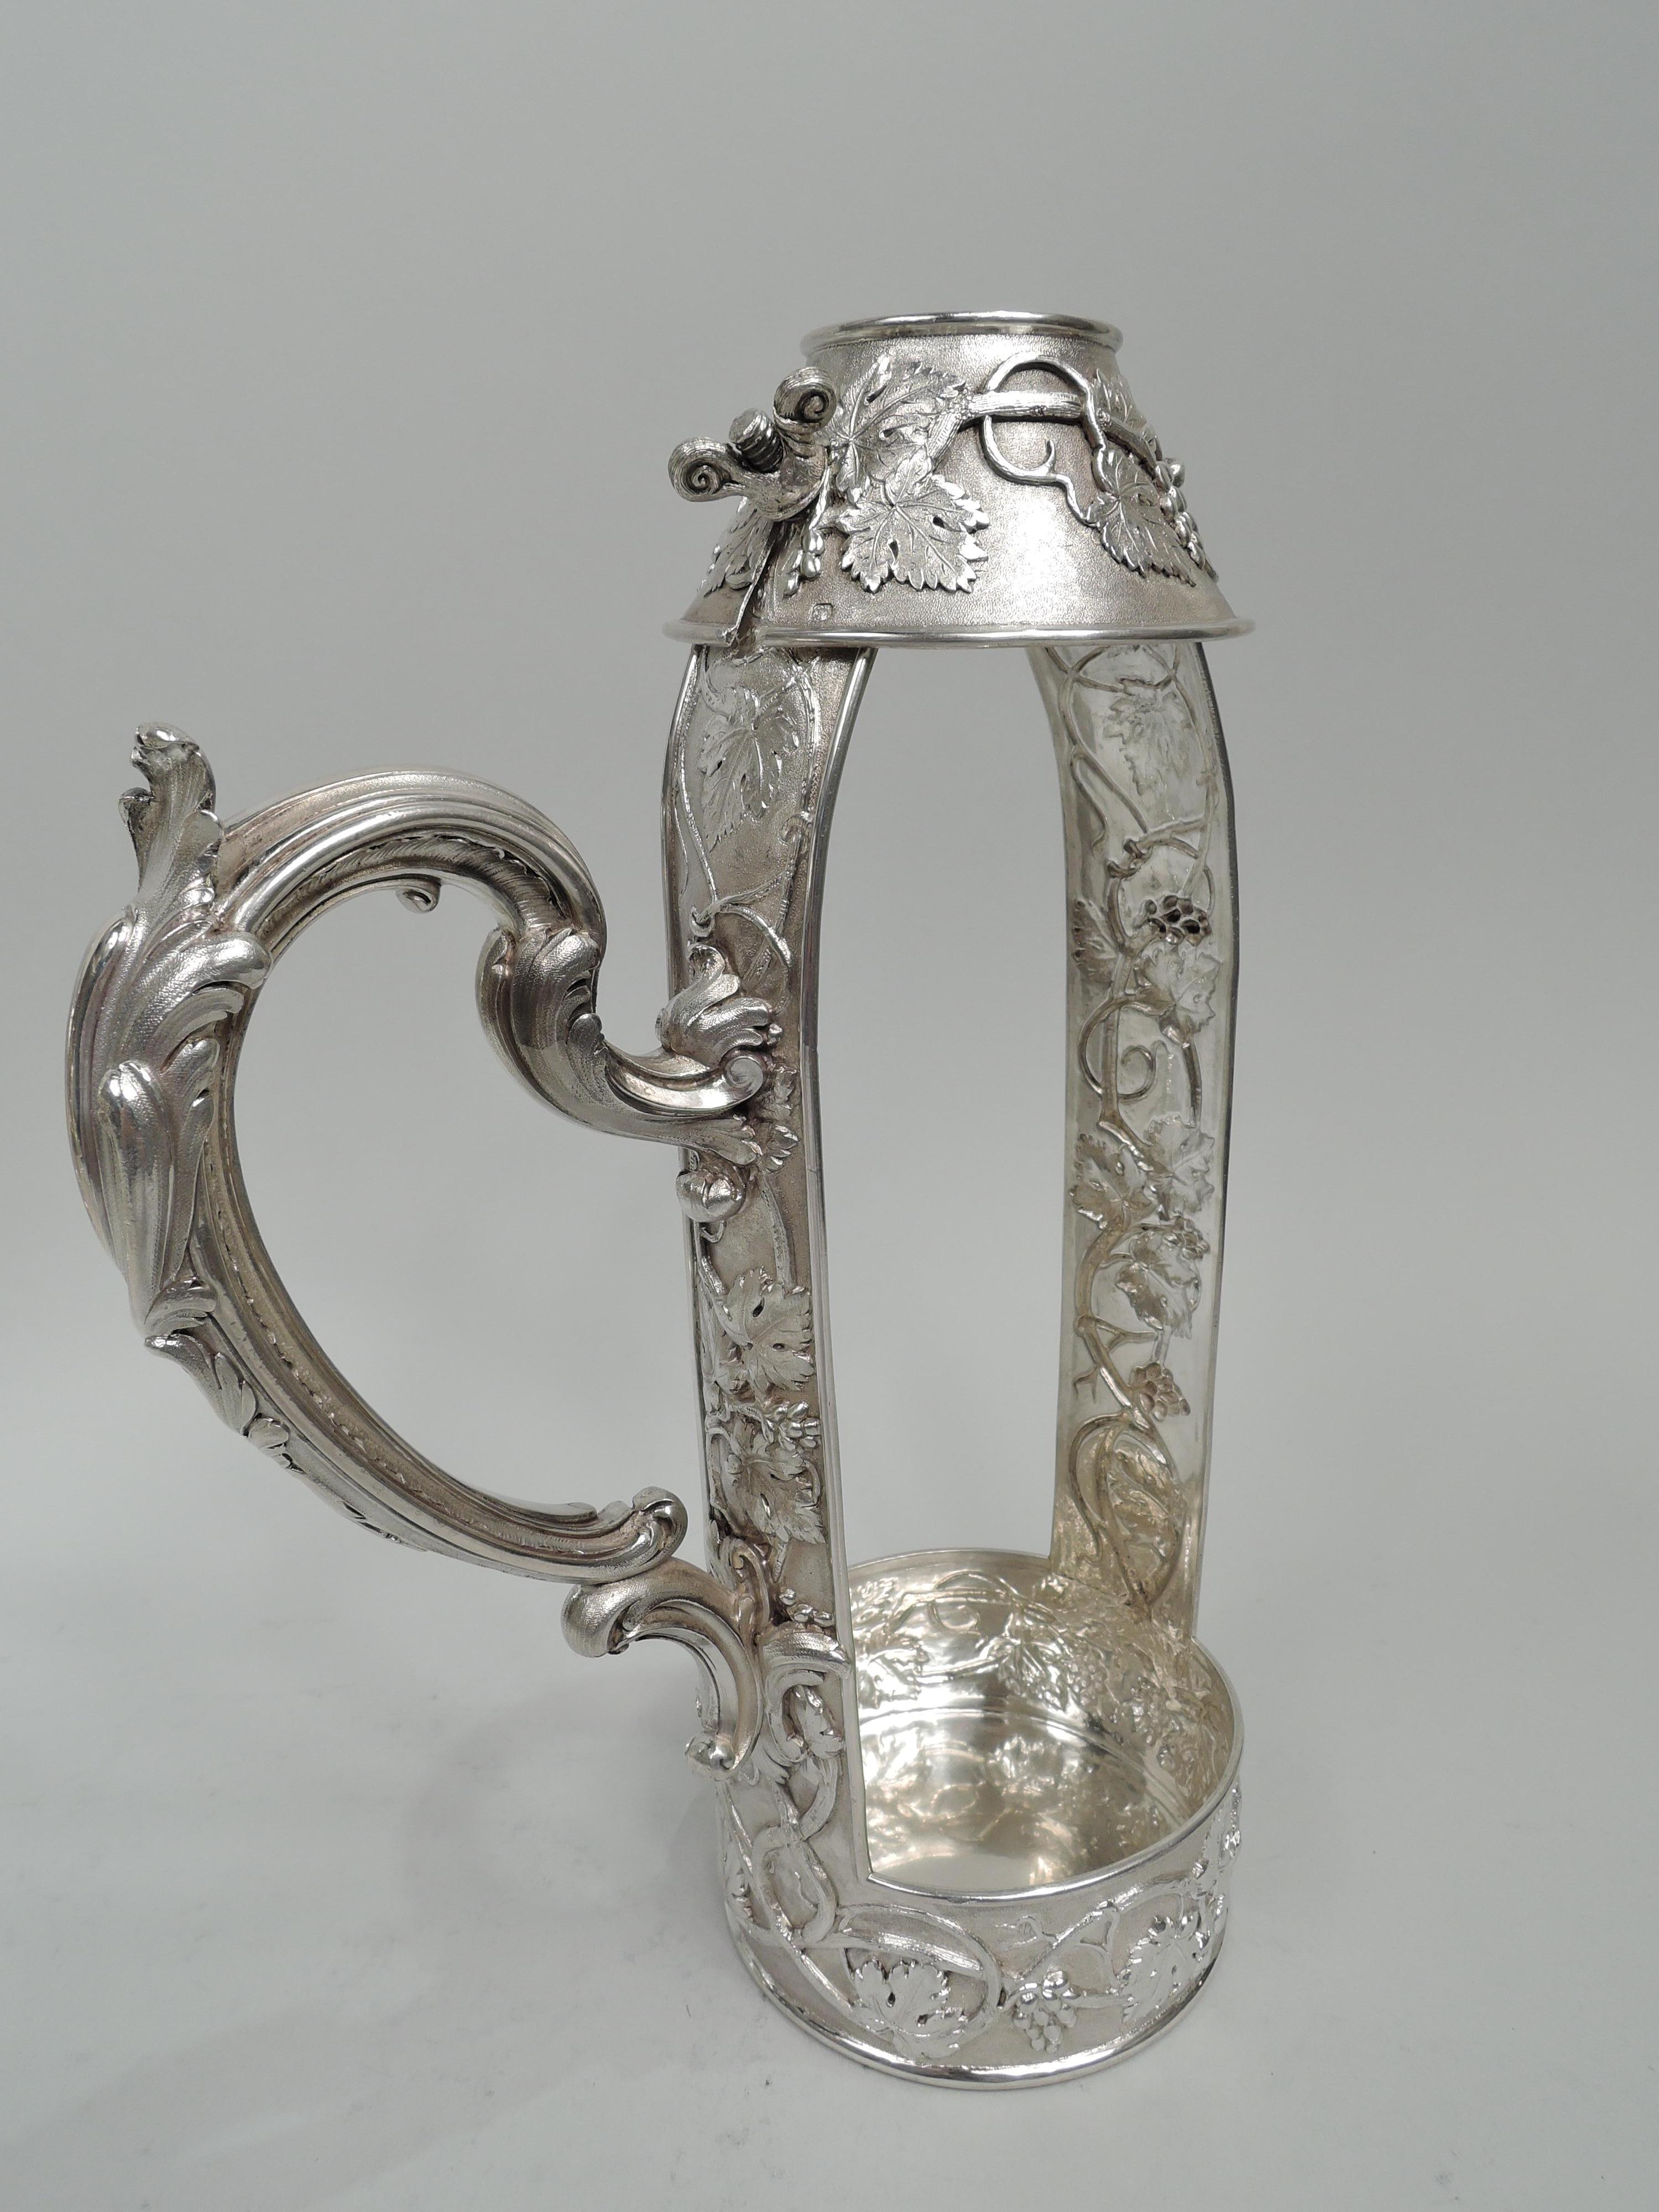 Belle Epoque Classical 950 silver wine bottle holder. Made by Odiot in France, ca 1890. Open body comprising two rectilinear supports mounted to round bowl with straight sides. Conical neck with adjustable screws. Leaf-capped double-scroll handle.